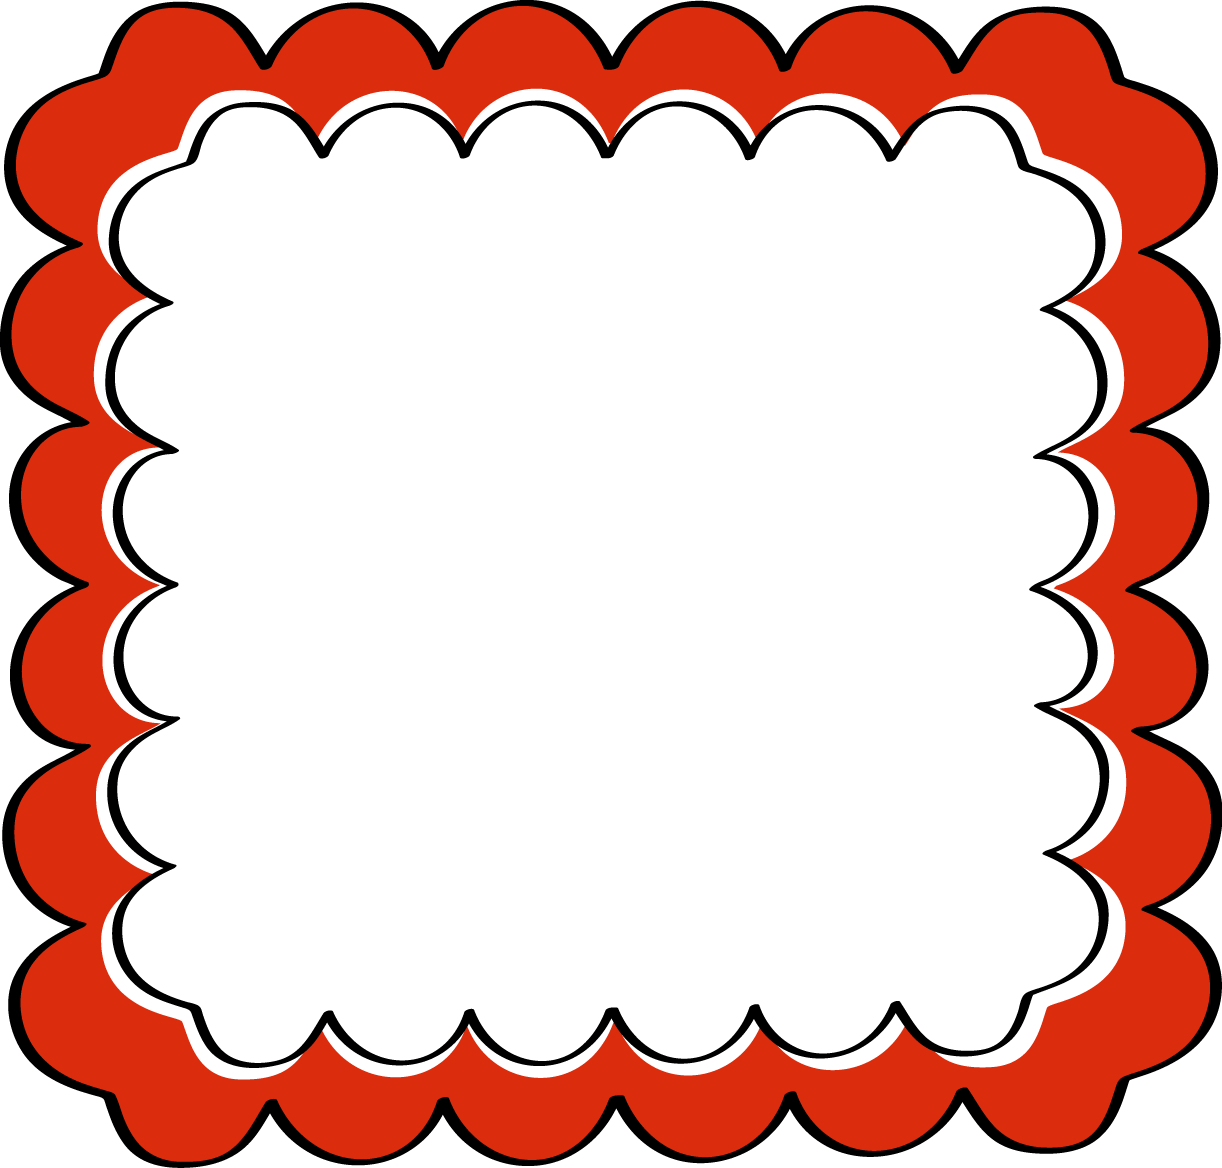 red-scalloped-frame.png (1222×1168) | Gift Tags | Pinterest